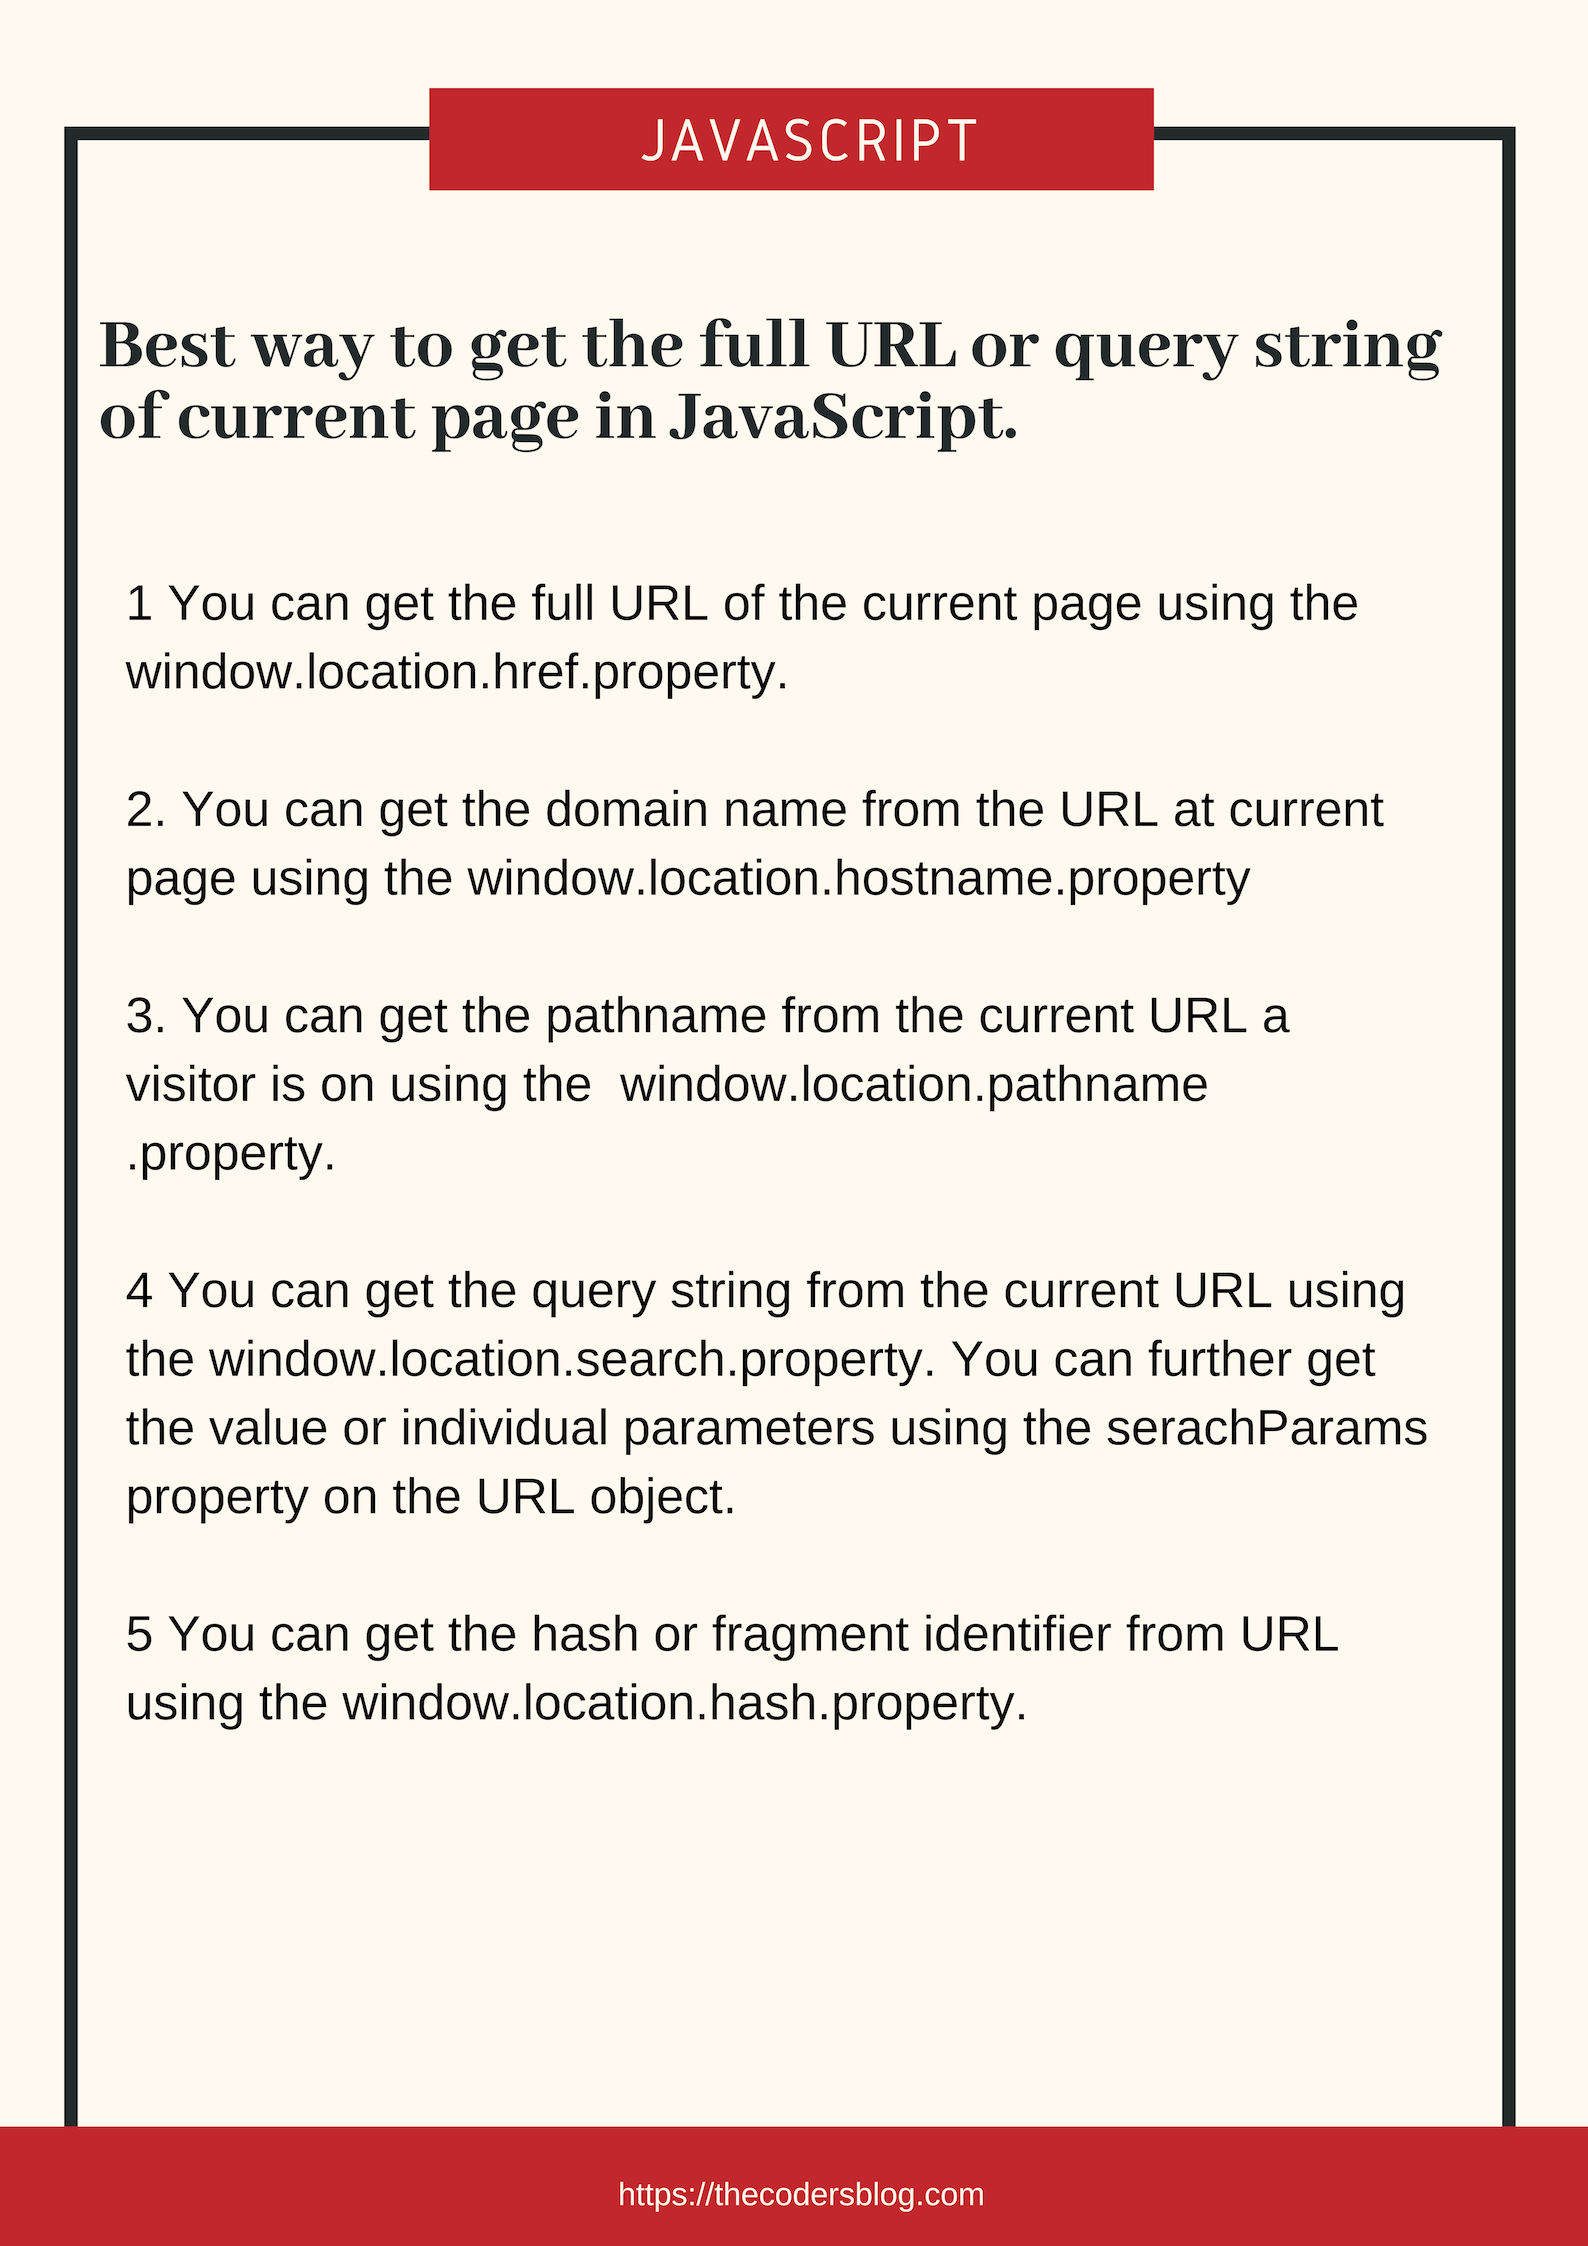 Best way to get the full URL or query string of current page in JavaScript.